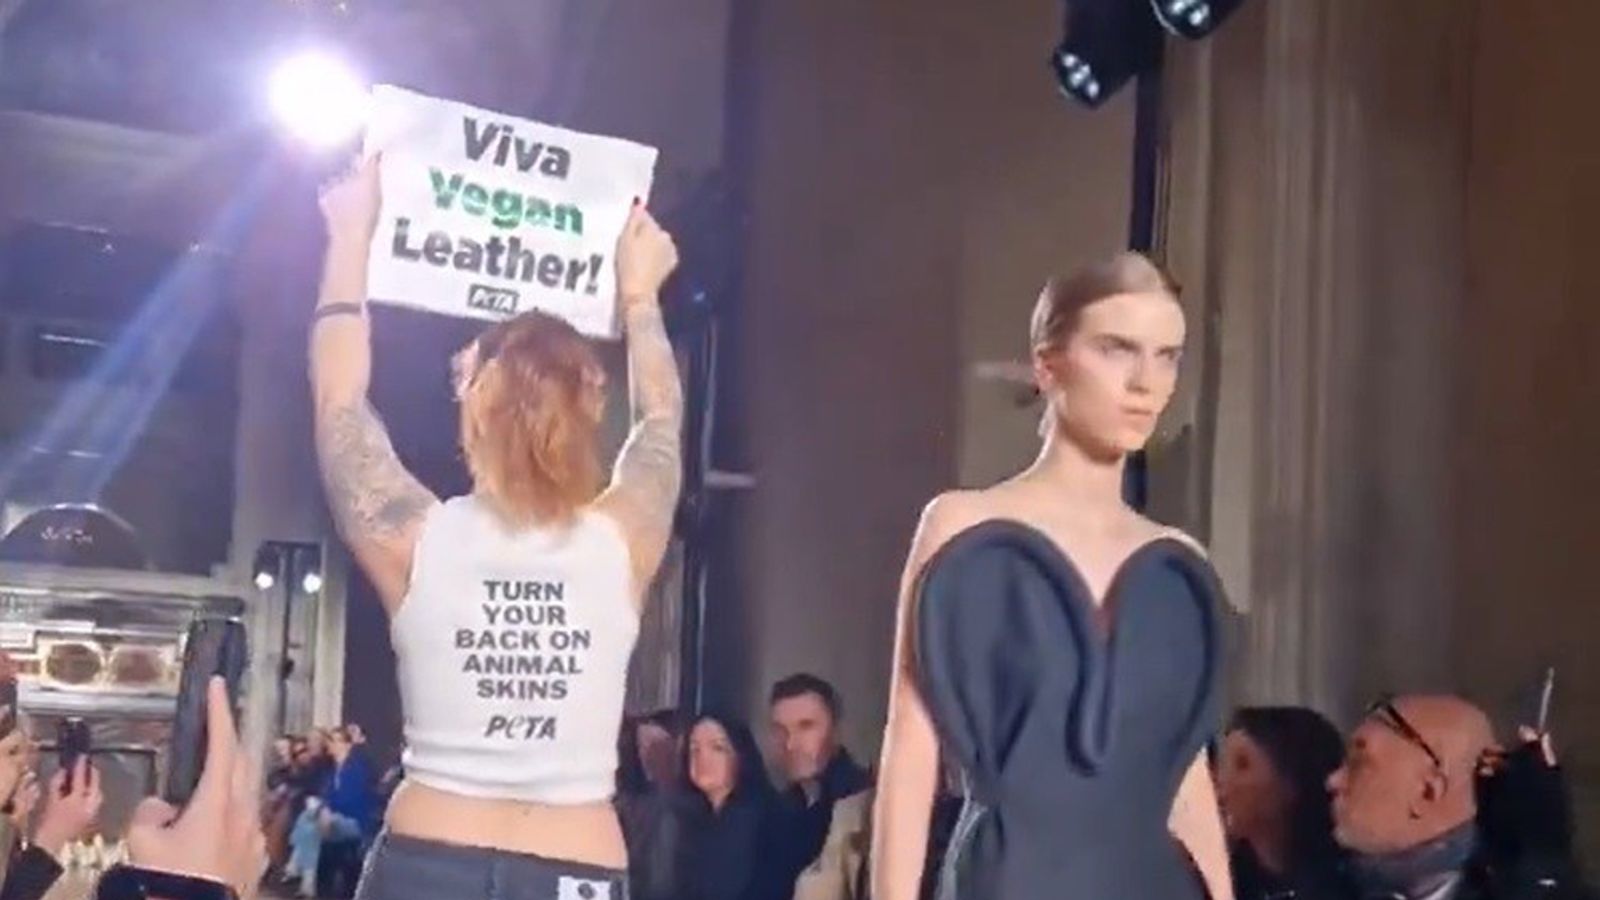 Victoria Beckham's Paris fashion show disrupted by animal rights protesters